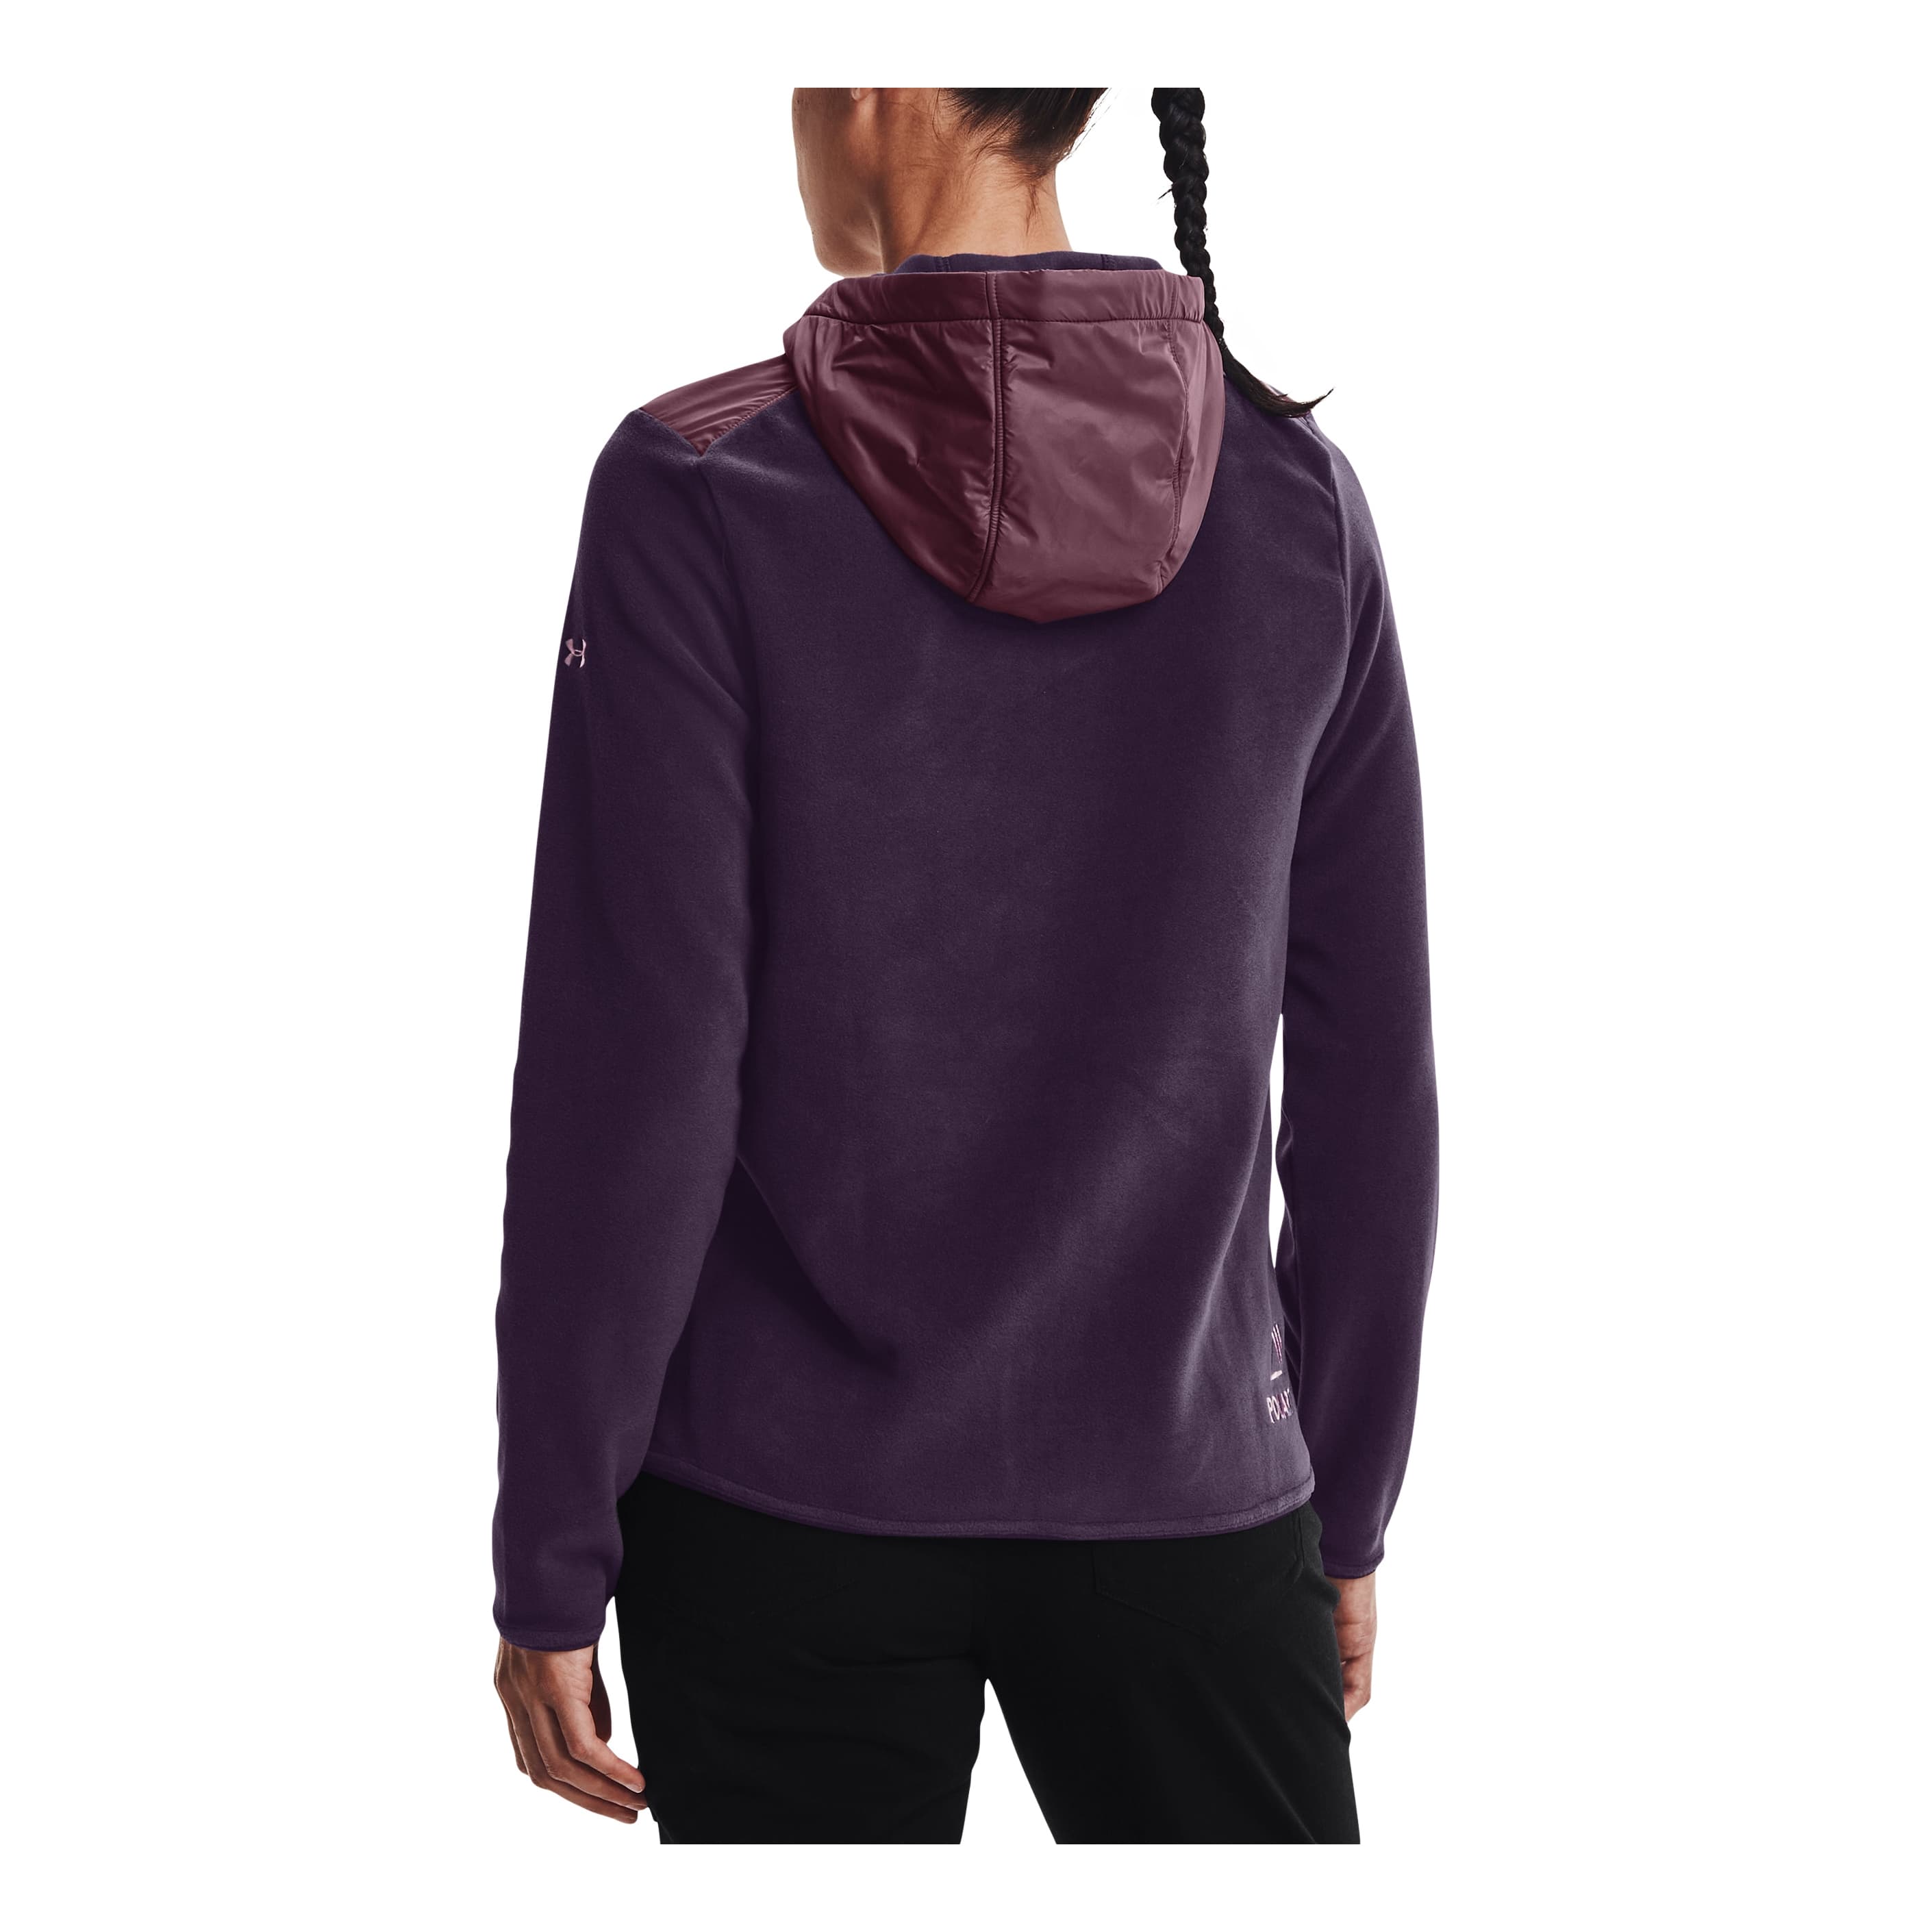 Under Armour® Women’s Polartec Forge Full-Zip Hoodie - Cyclone - back